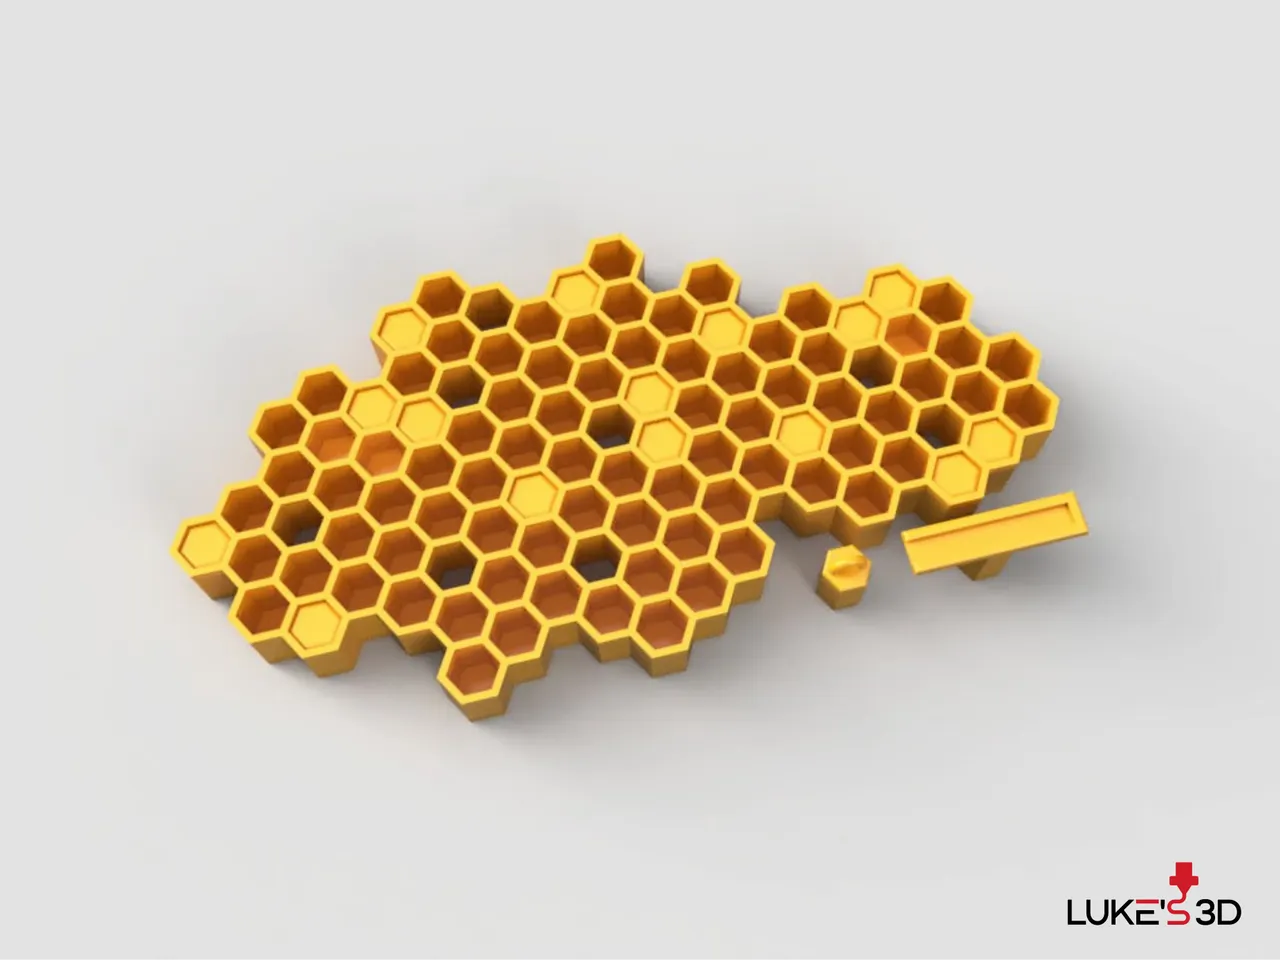 Honeycomb Key Holder – Blossom Collections